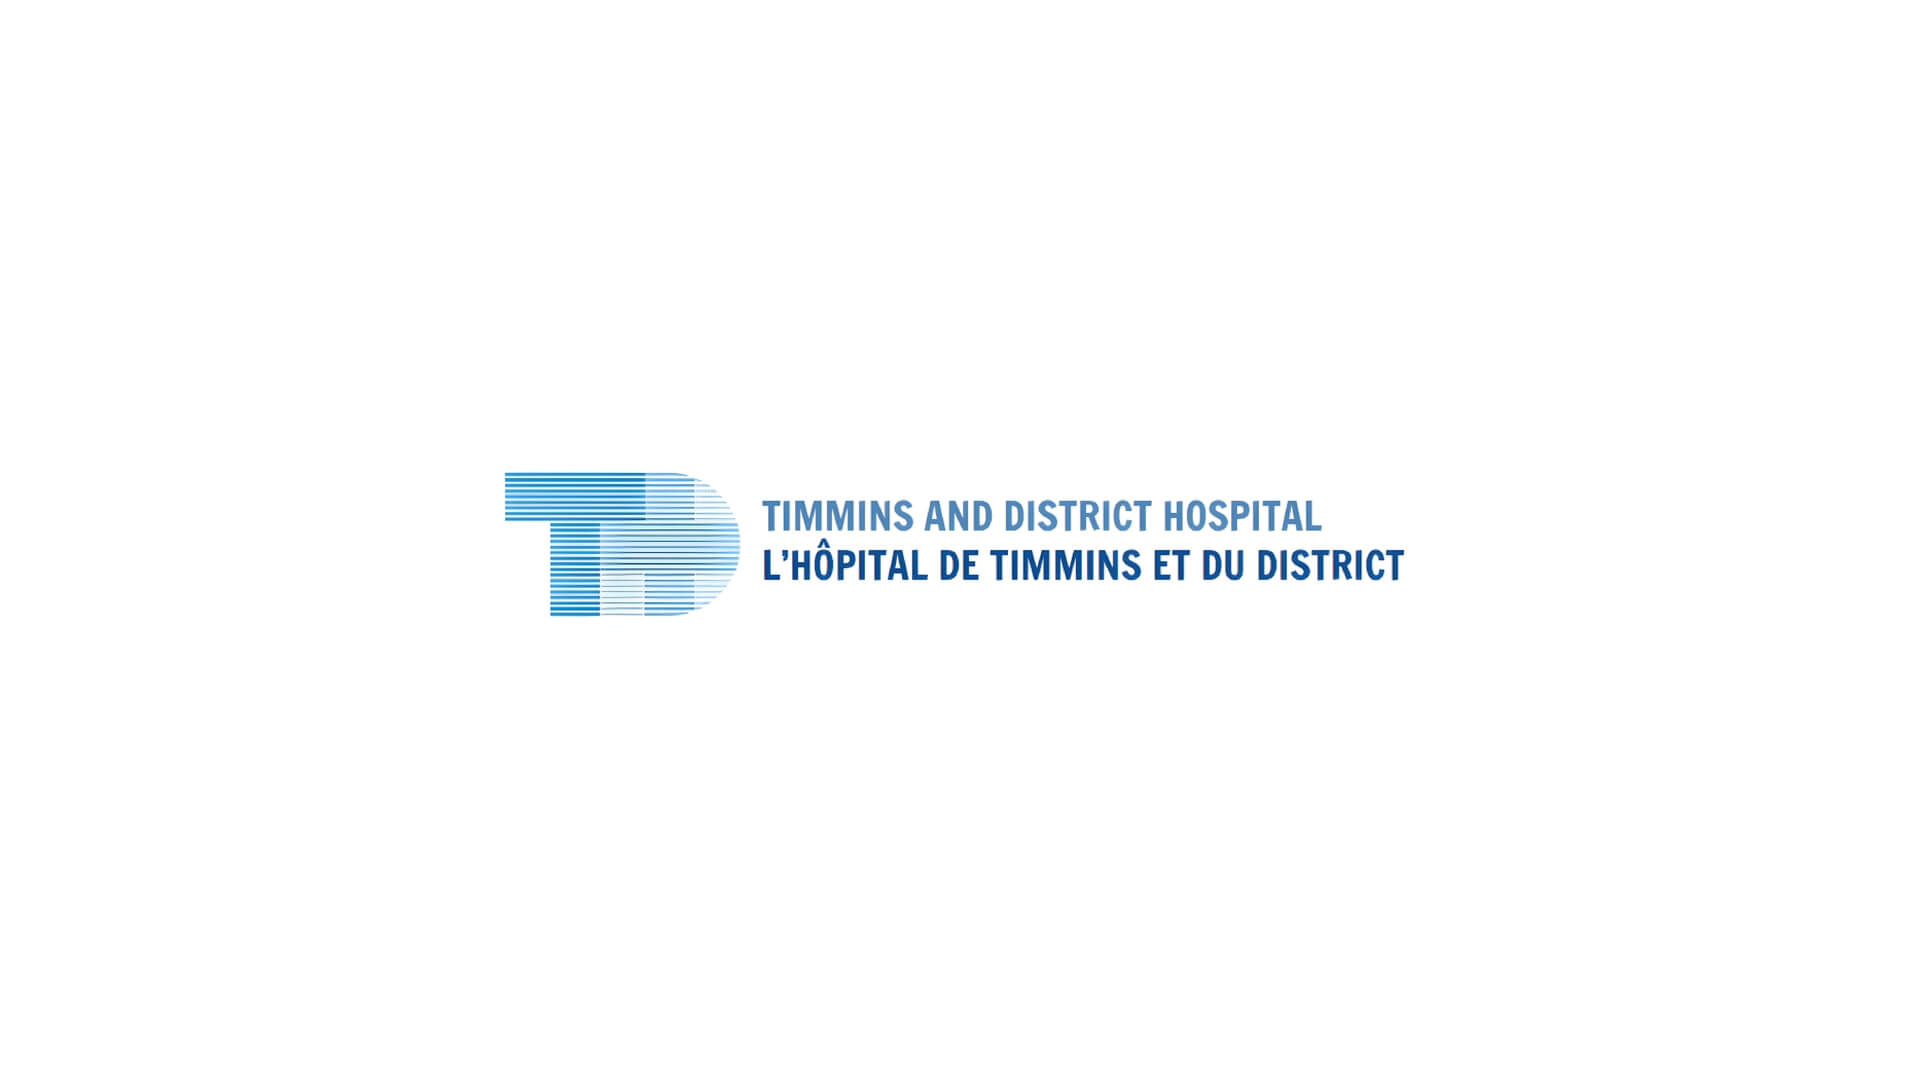 Timmins Care Logo of timmins and district hospital, featuring a stylized letter "t" in blue, next to the hospital name in english and french. Cochrane District Social Services Administration Board